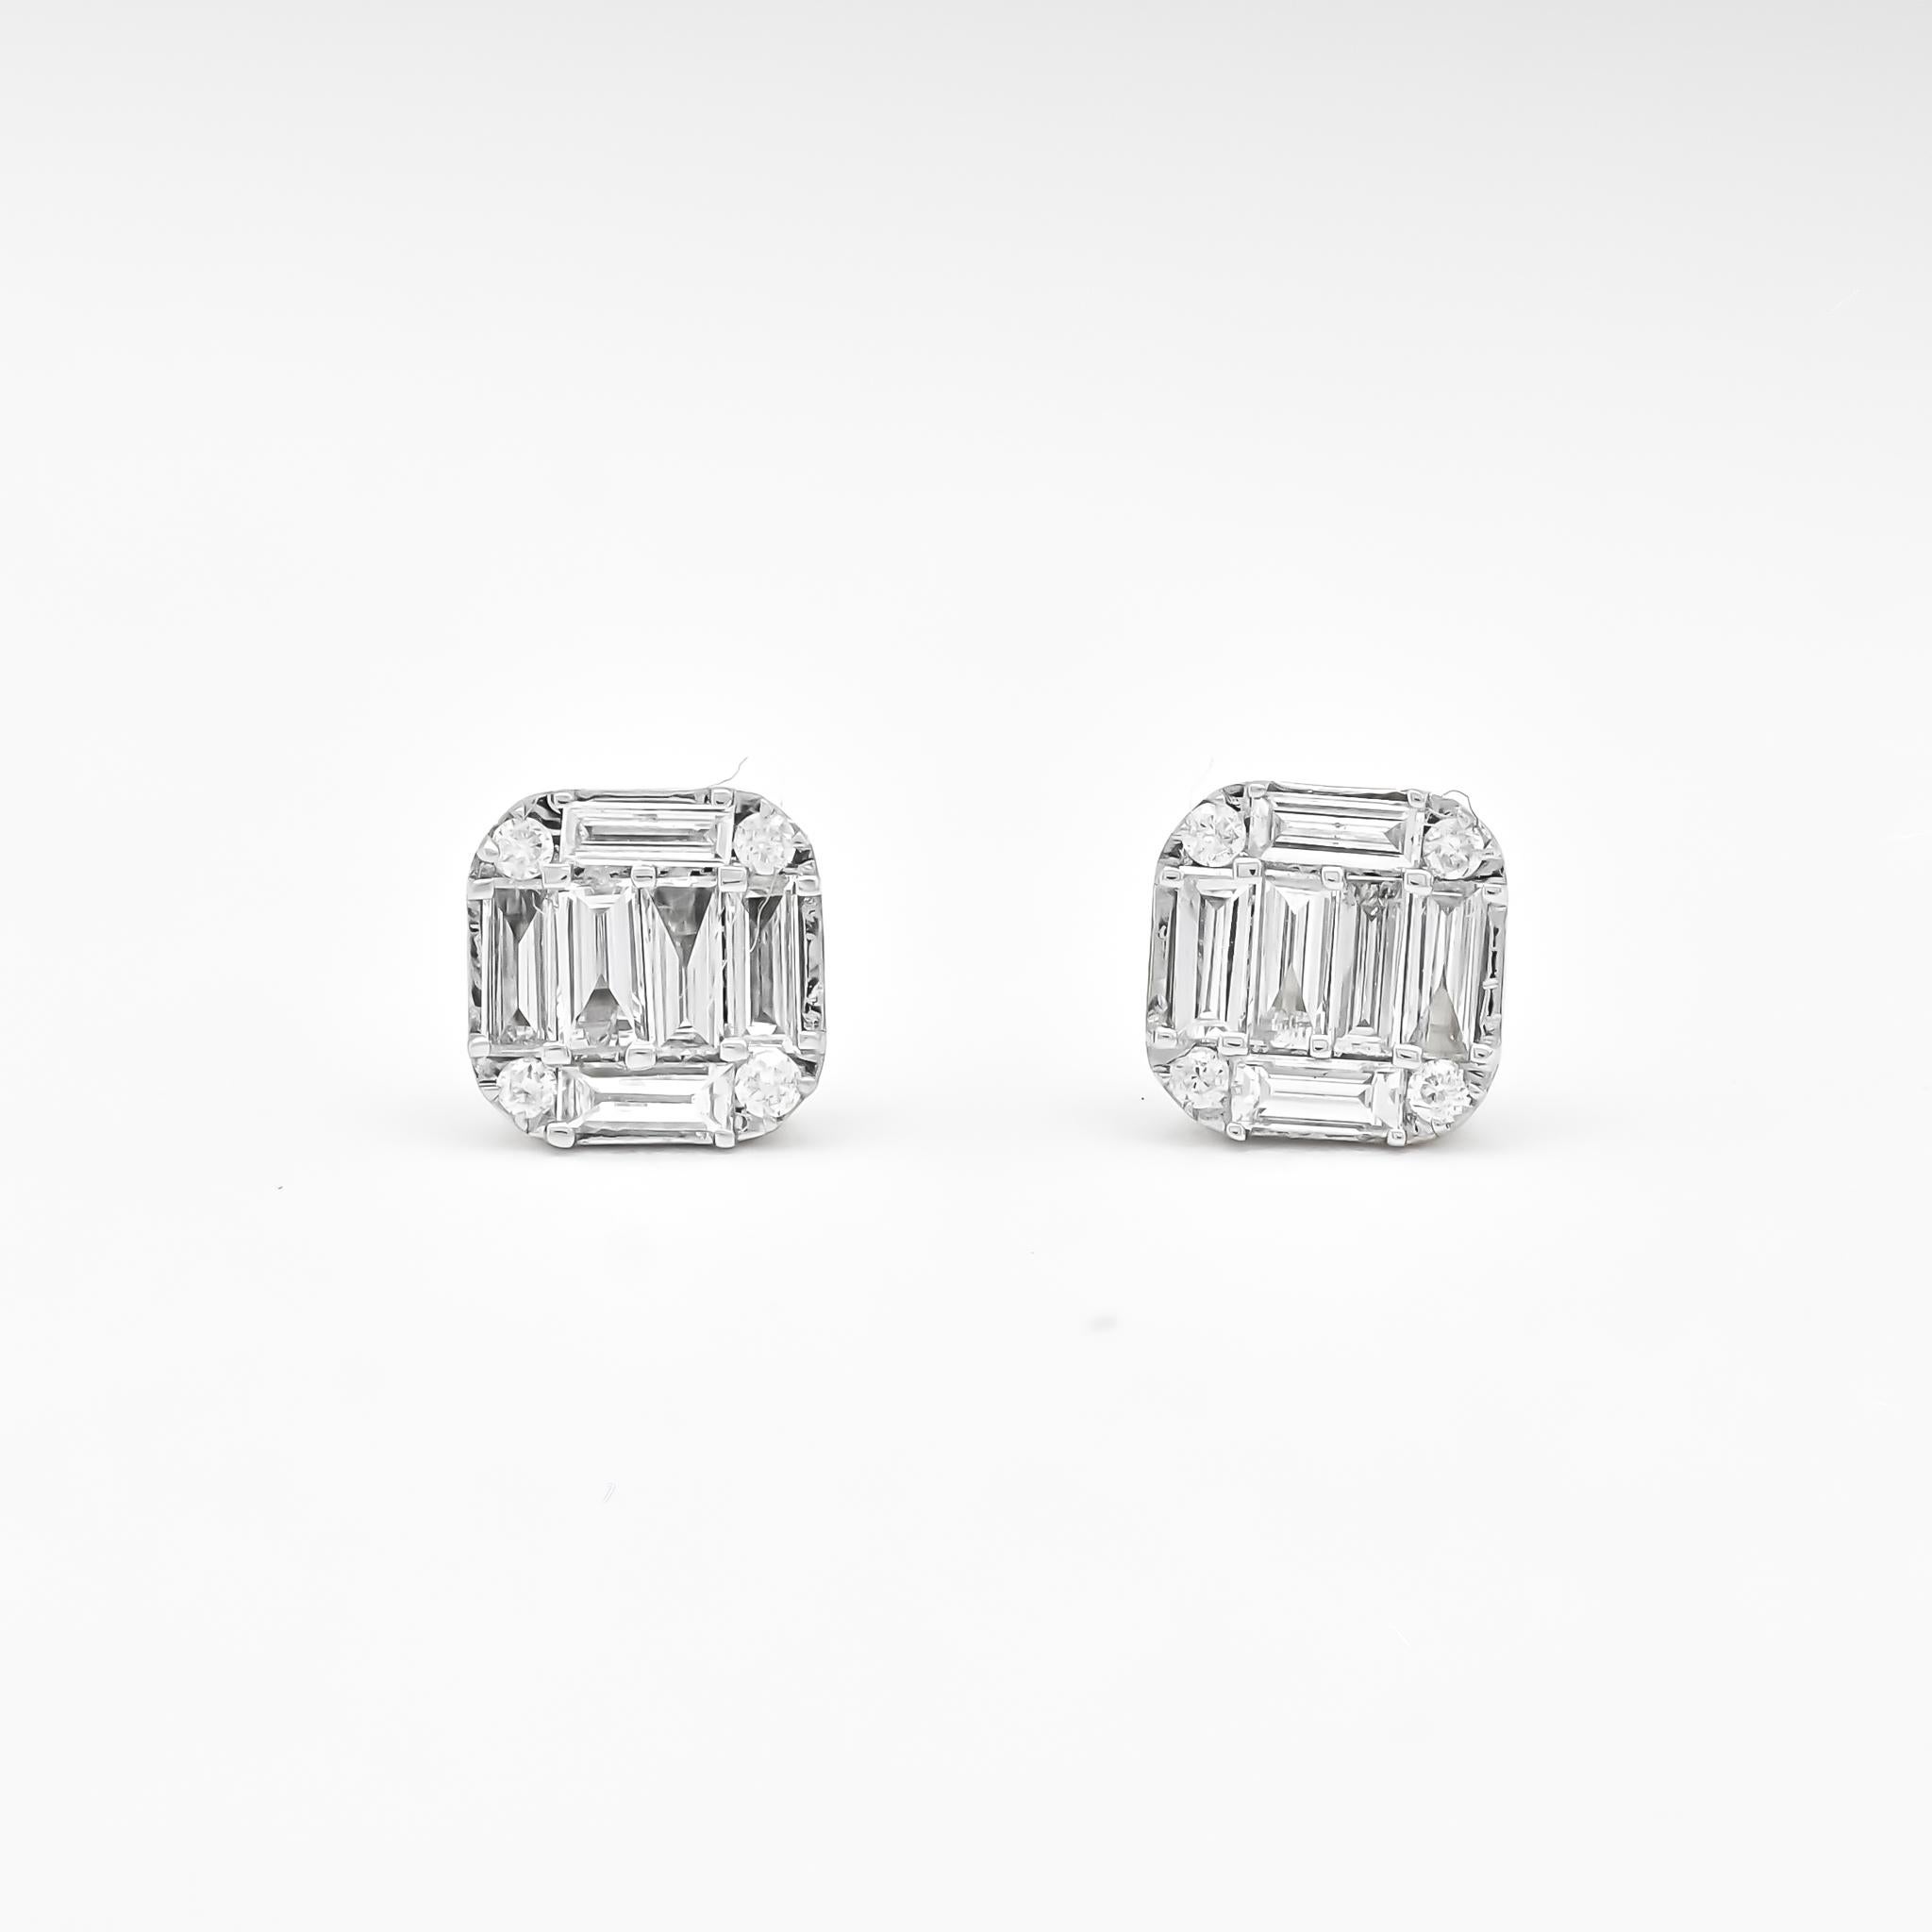  Natural Diamonds 0.25cts in 18KT White Gold Petite Stud Earrings E09332 For Sale 2